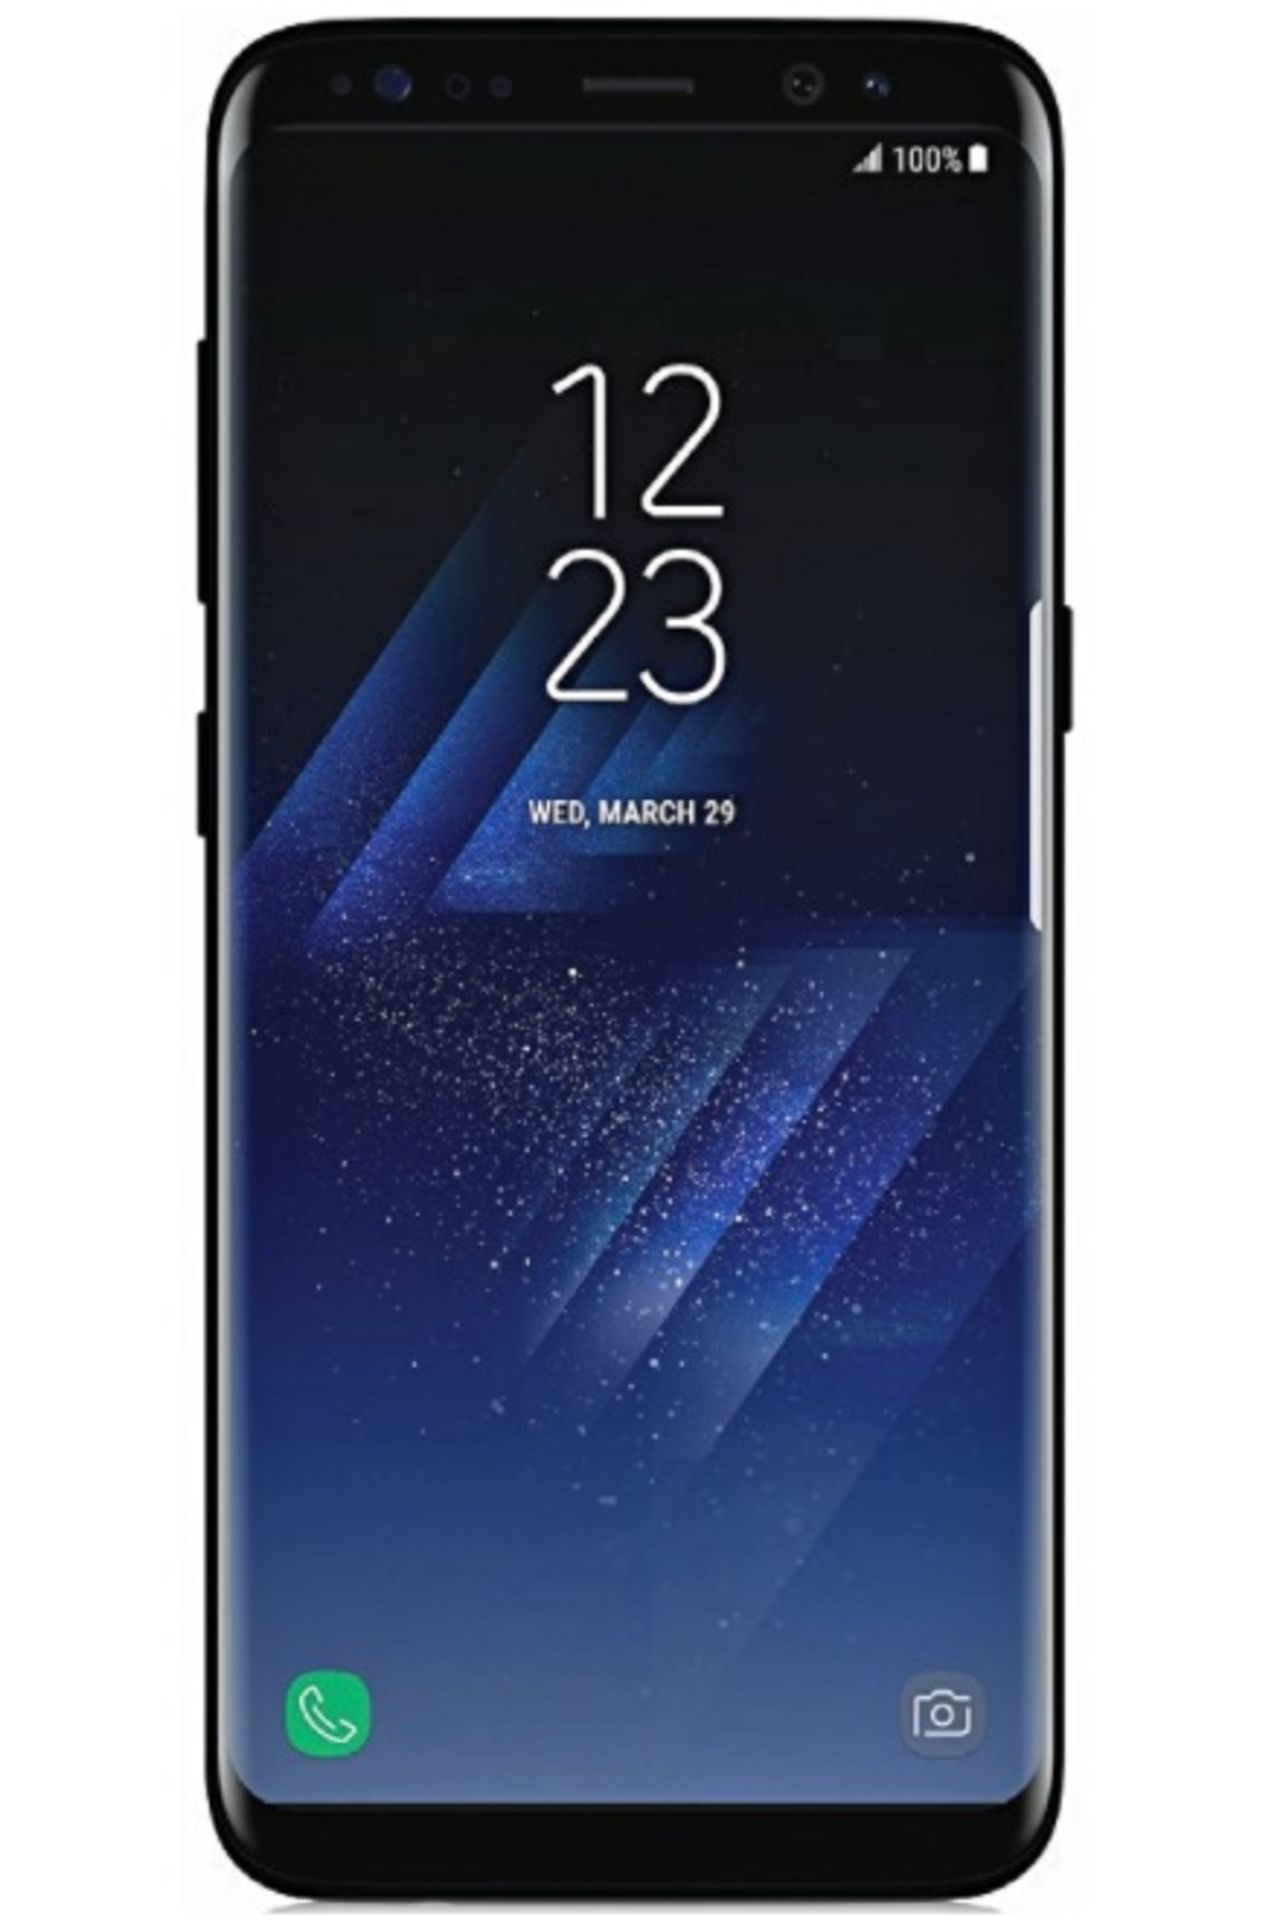 Grade A Samsung S8+ ( G9550F ) Colours May Vary - Item Available After Approx 12 Working Days After